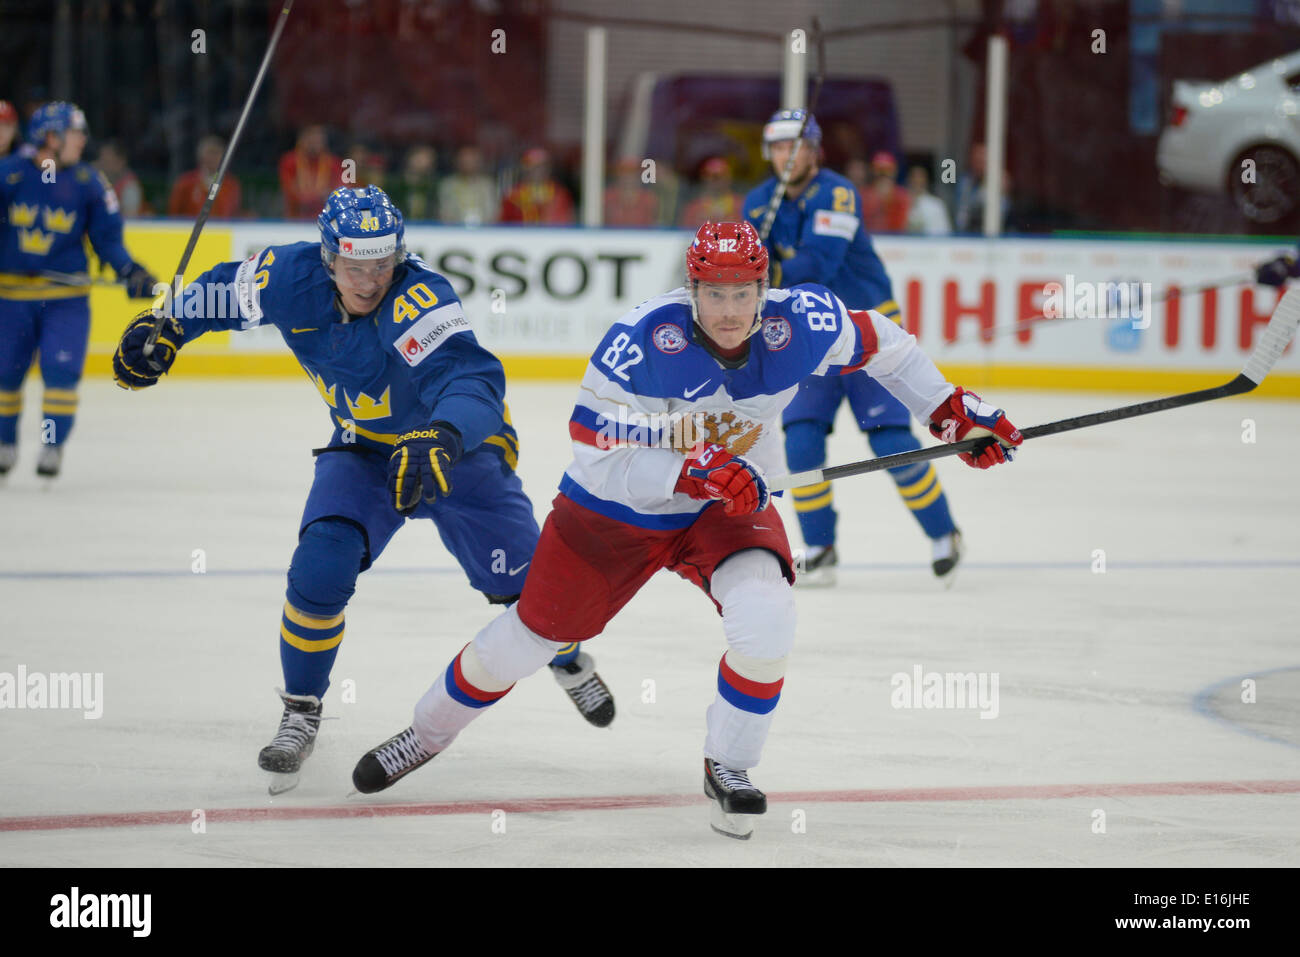 MEDVEDEV Yevgeni of Russia and RASMUSSEN Dennis of Sweden during 2014 IIHF World Ice Hockey Championship semifinal match Stock Photo